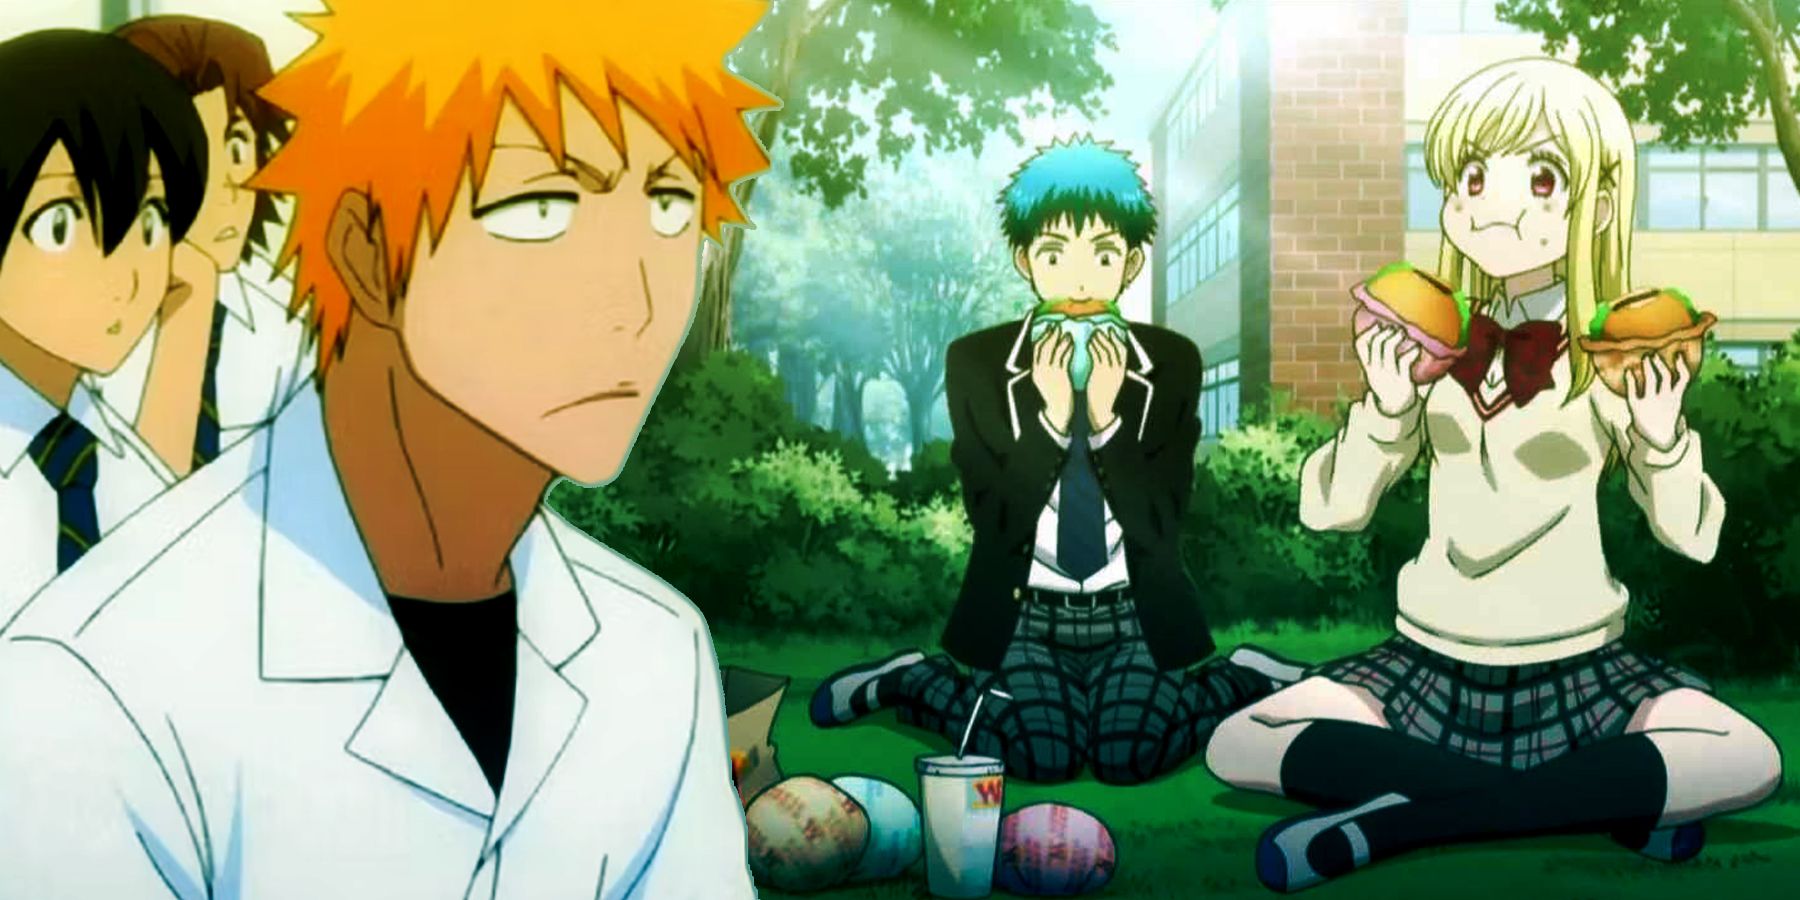 On the left, Ichigo of 'Bleach' sits in class with fellow students, looking exasperated. On the right, Ryu and Urara of 'Yamada-Kun and the Seven Witches' sit on the grass and enjoy fast food.